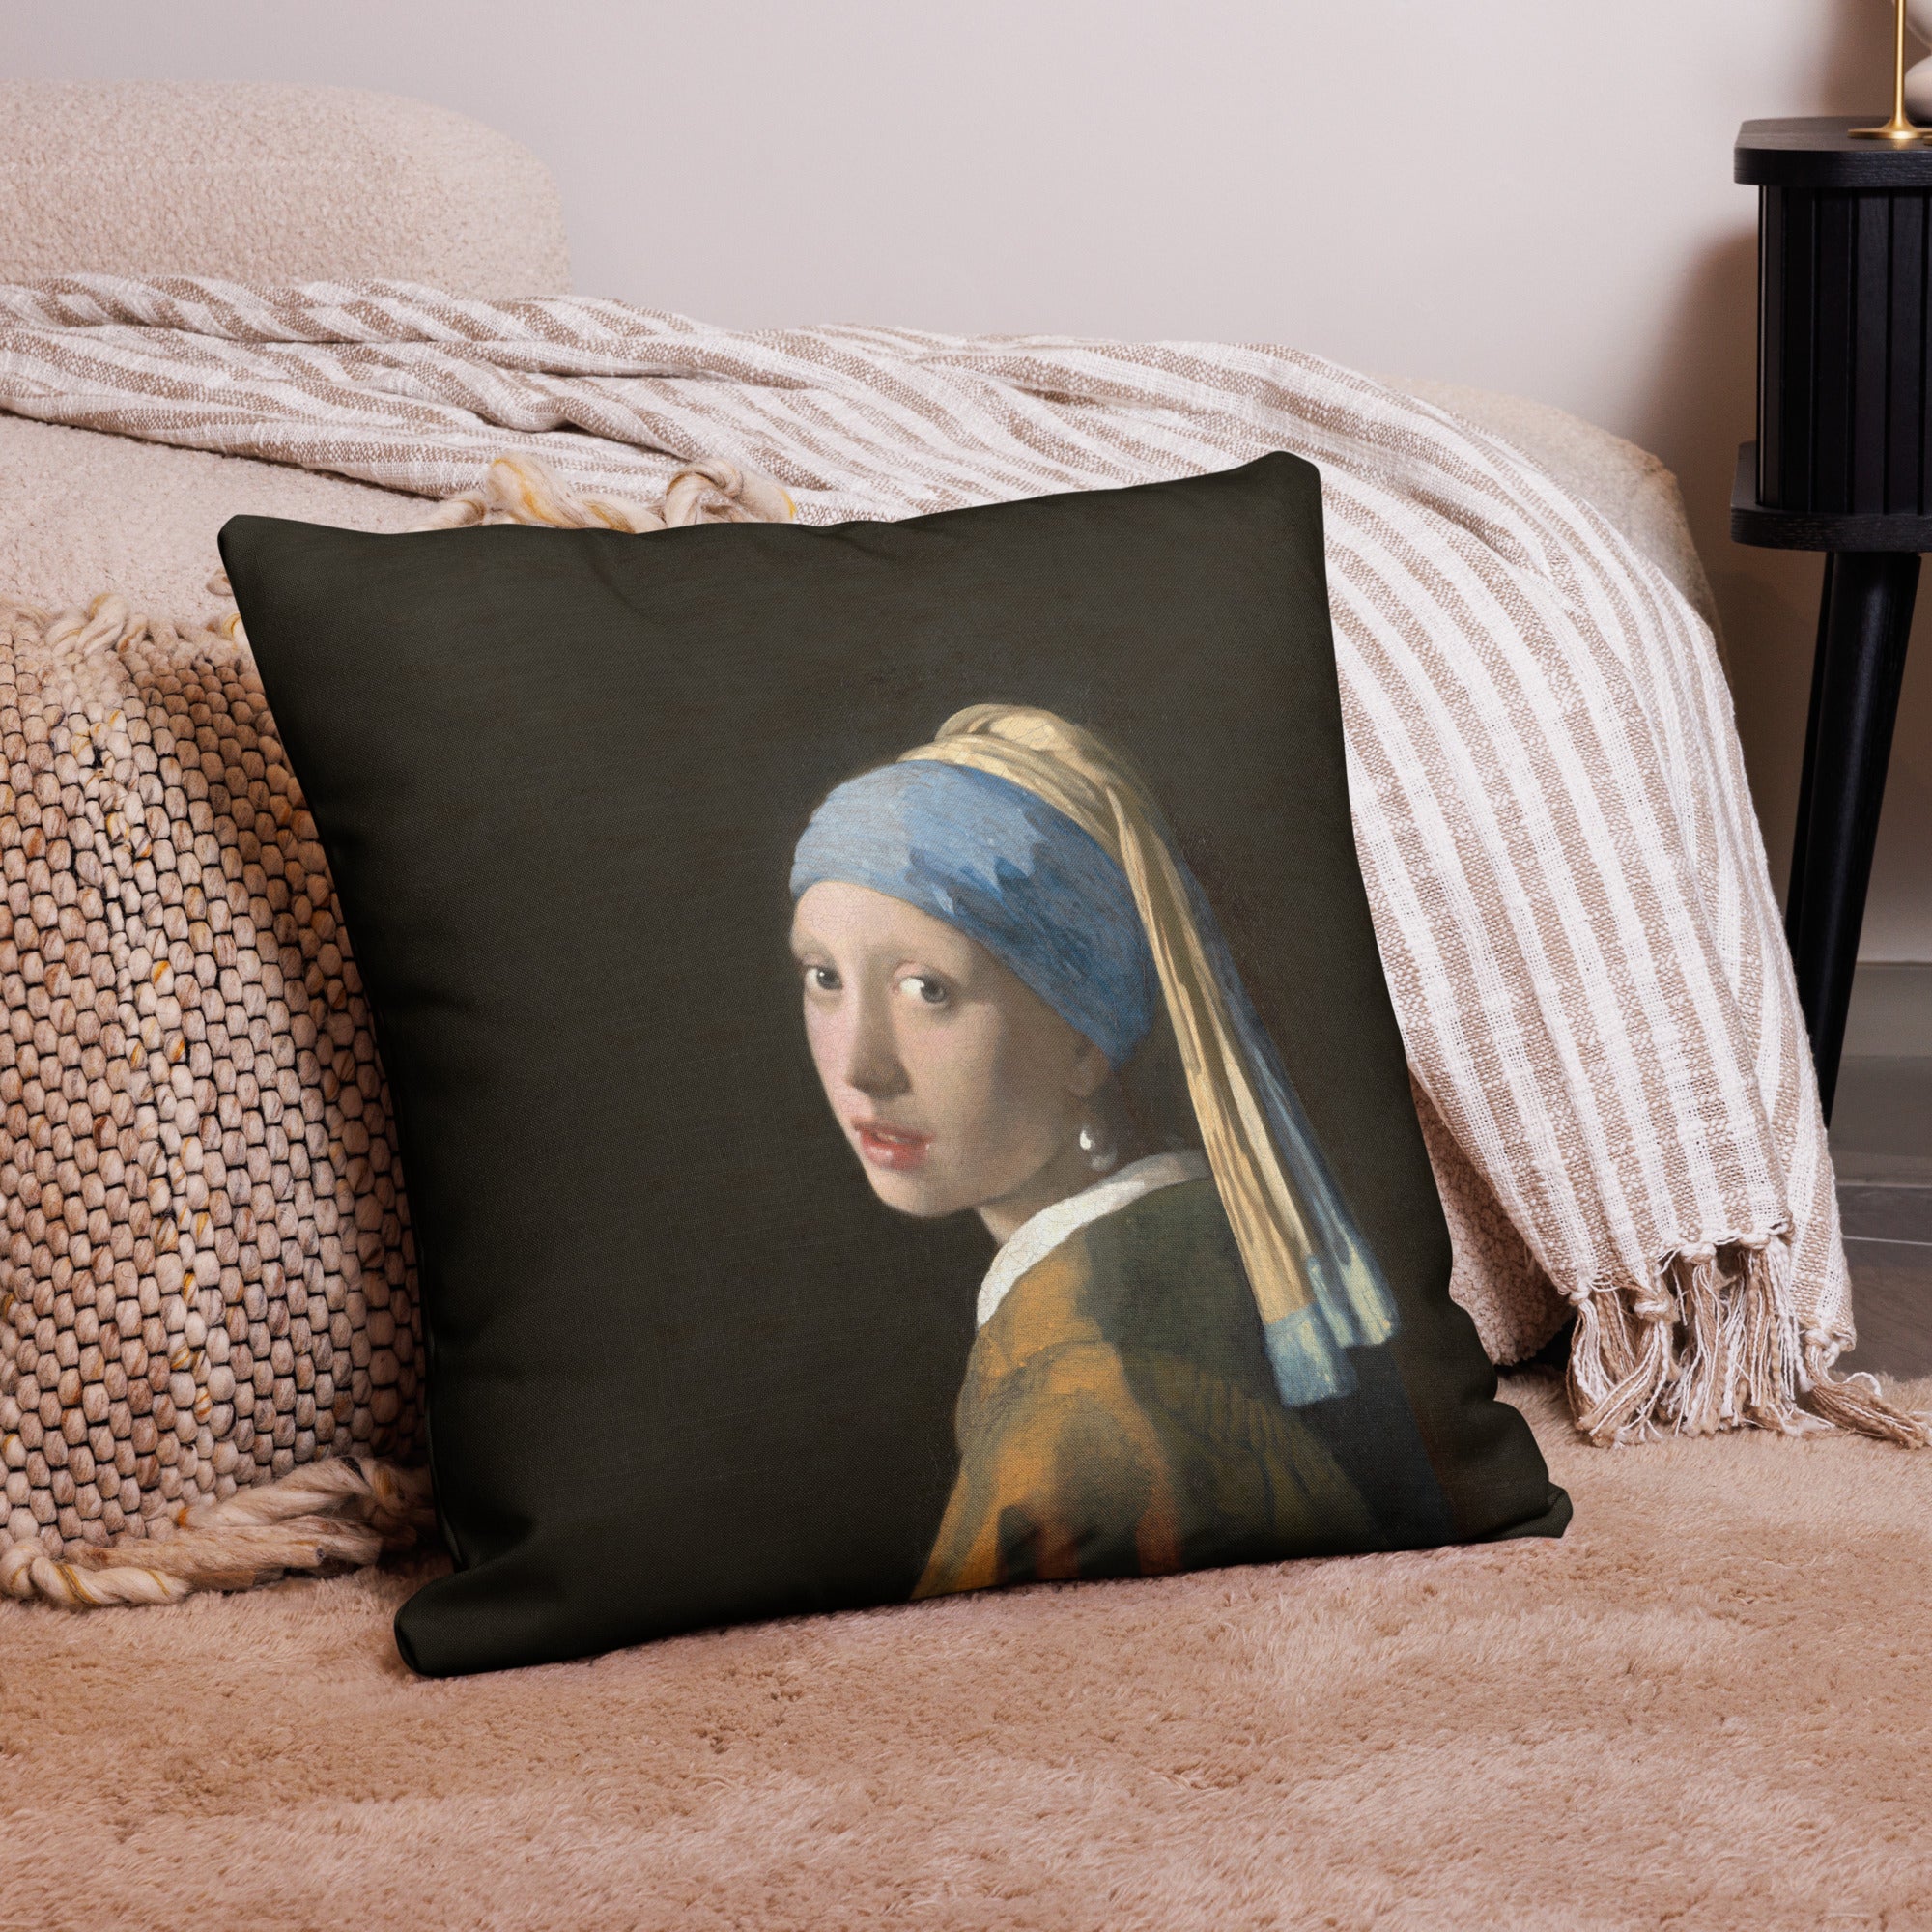 Johannes Vermeer 'Girl with a Pearl Earring' Famous Painting Premium Pillow | Premium Art Cushion